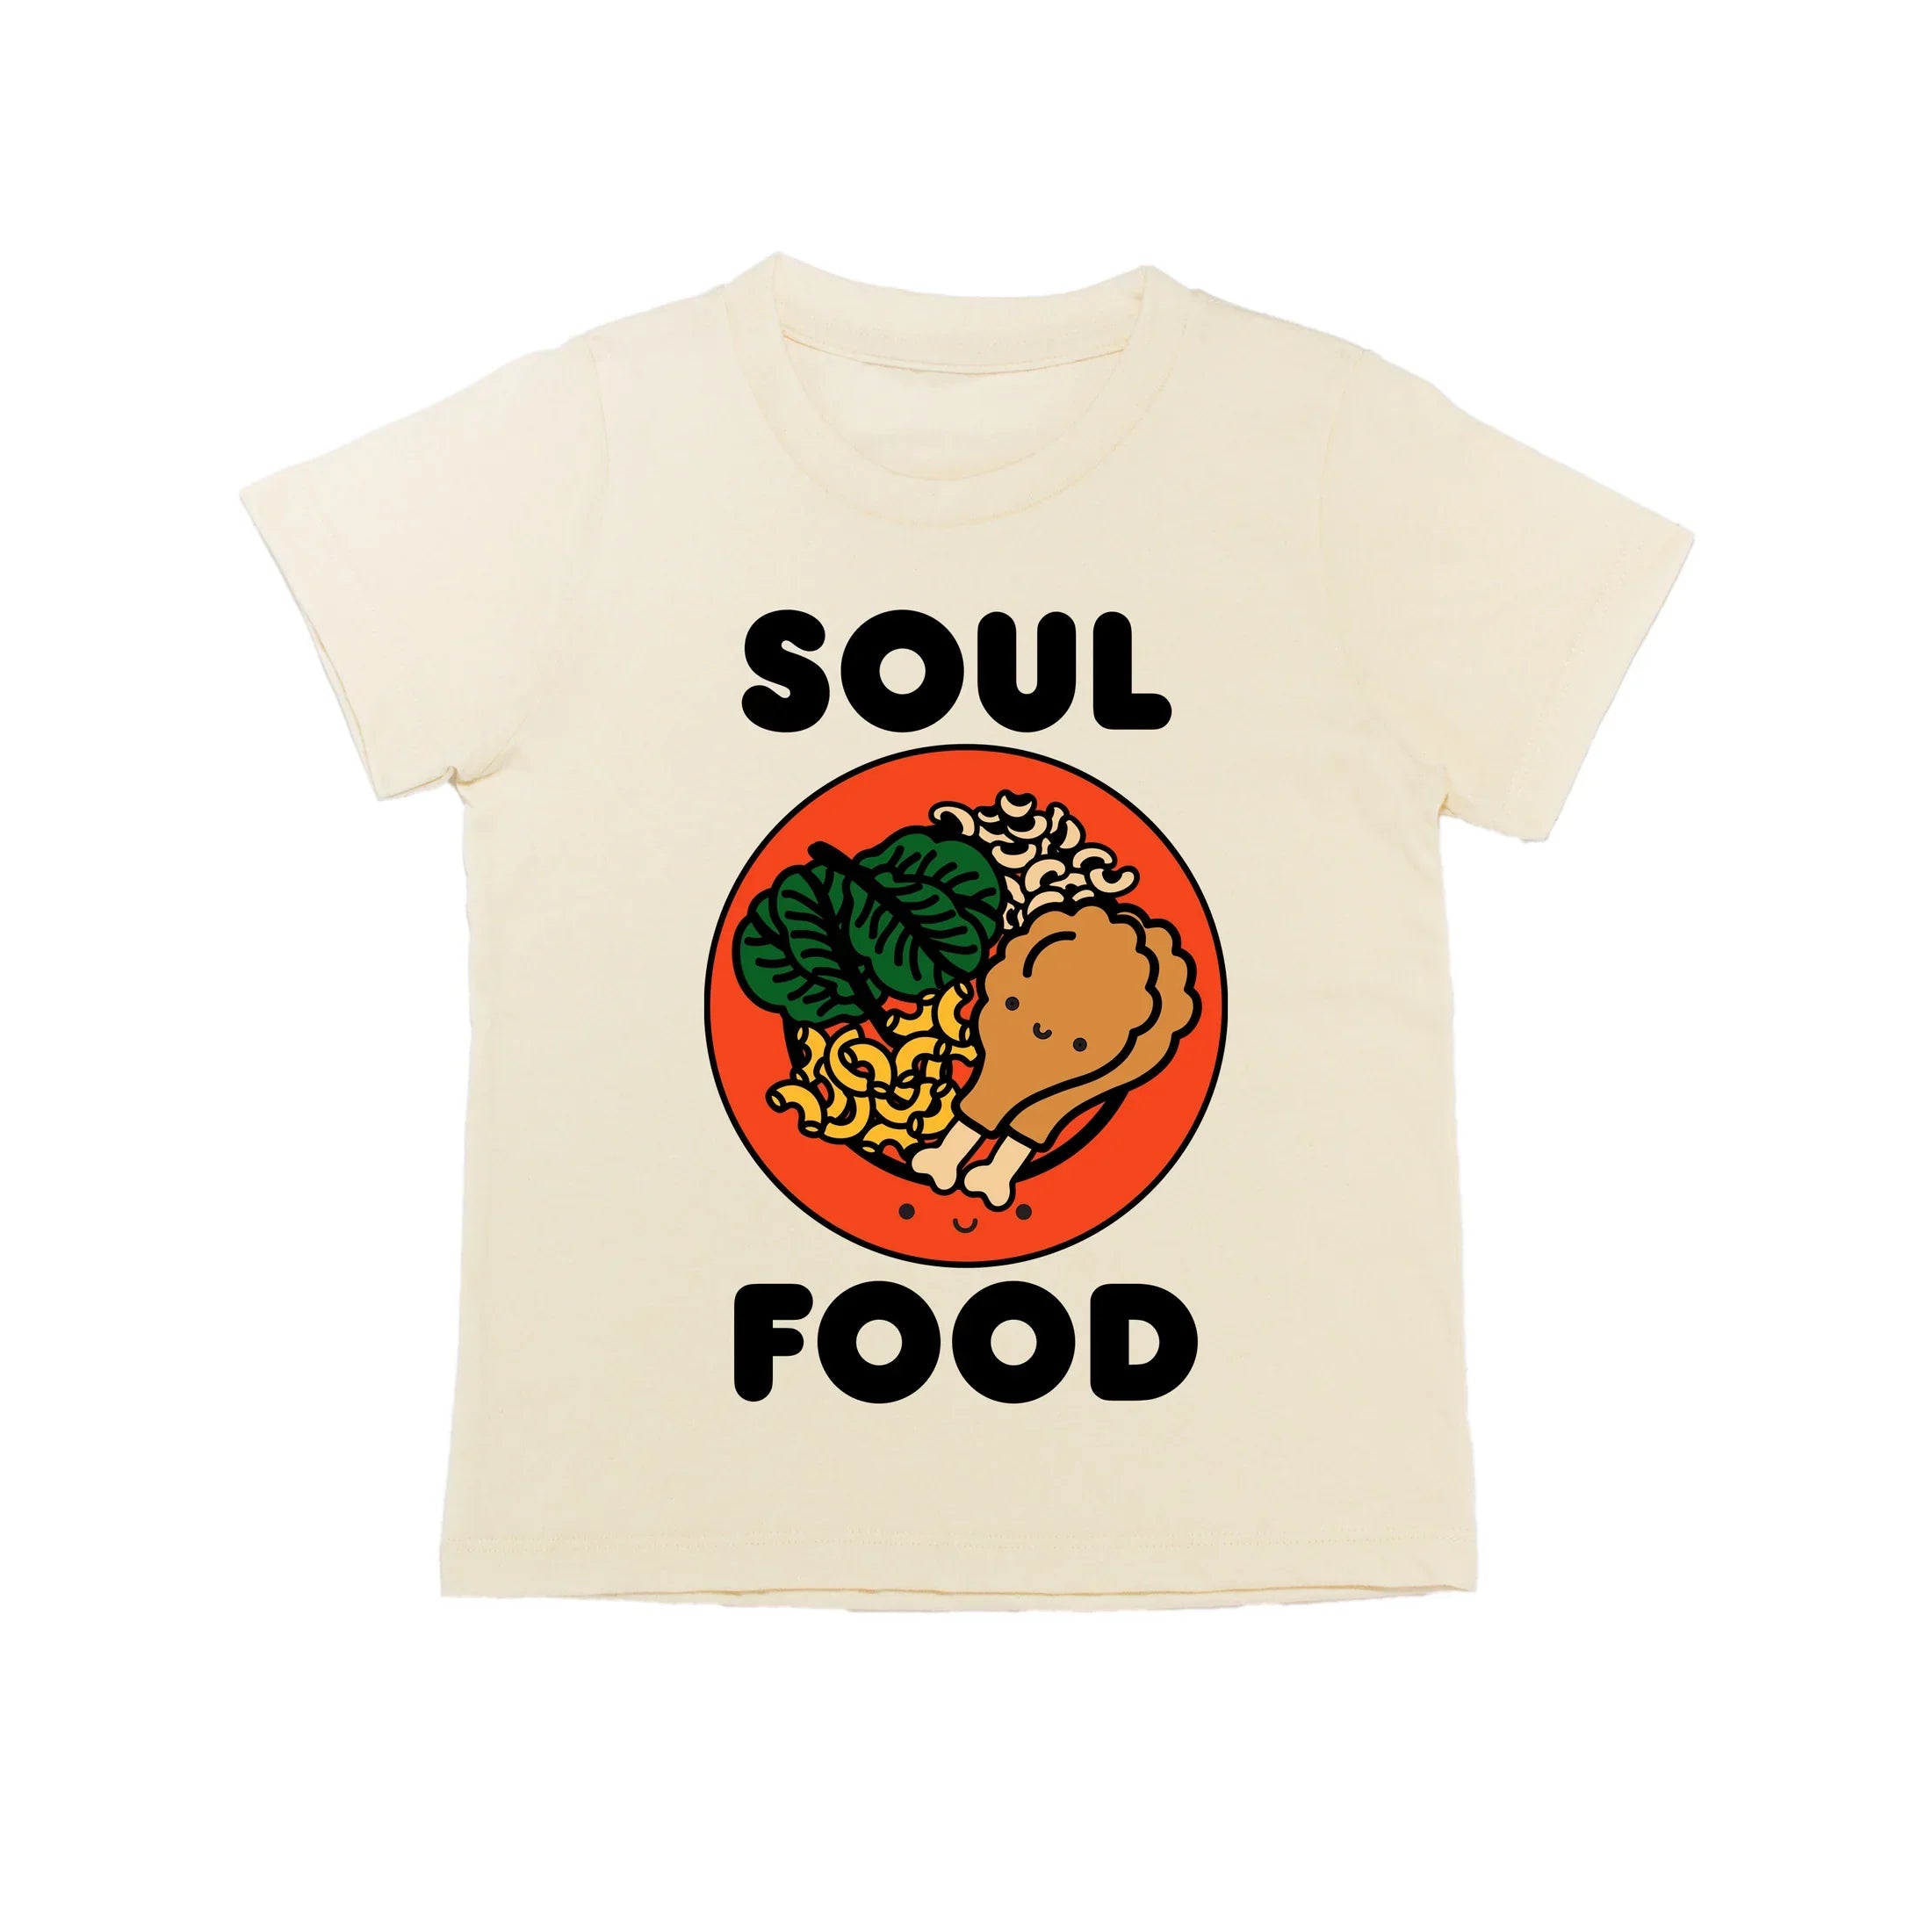 Sunny and Ted X Mochi Kids Soul Food Baby + Kids + Adult tee